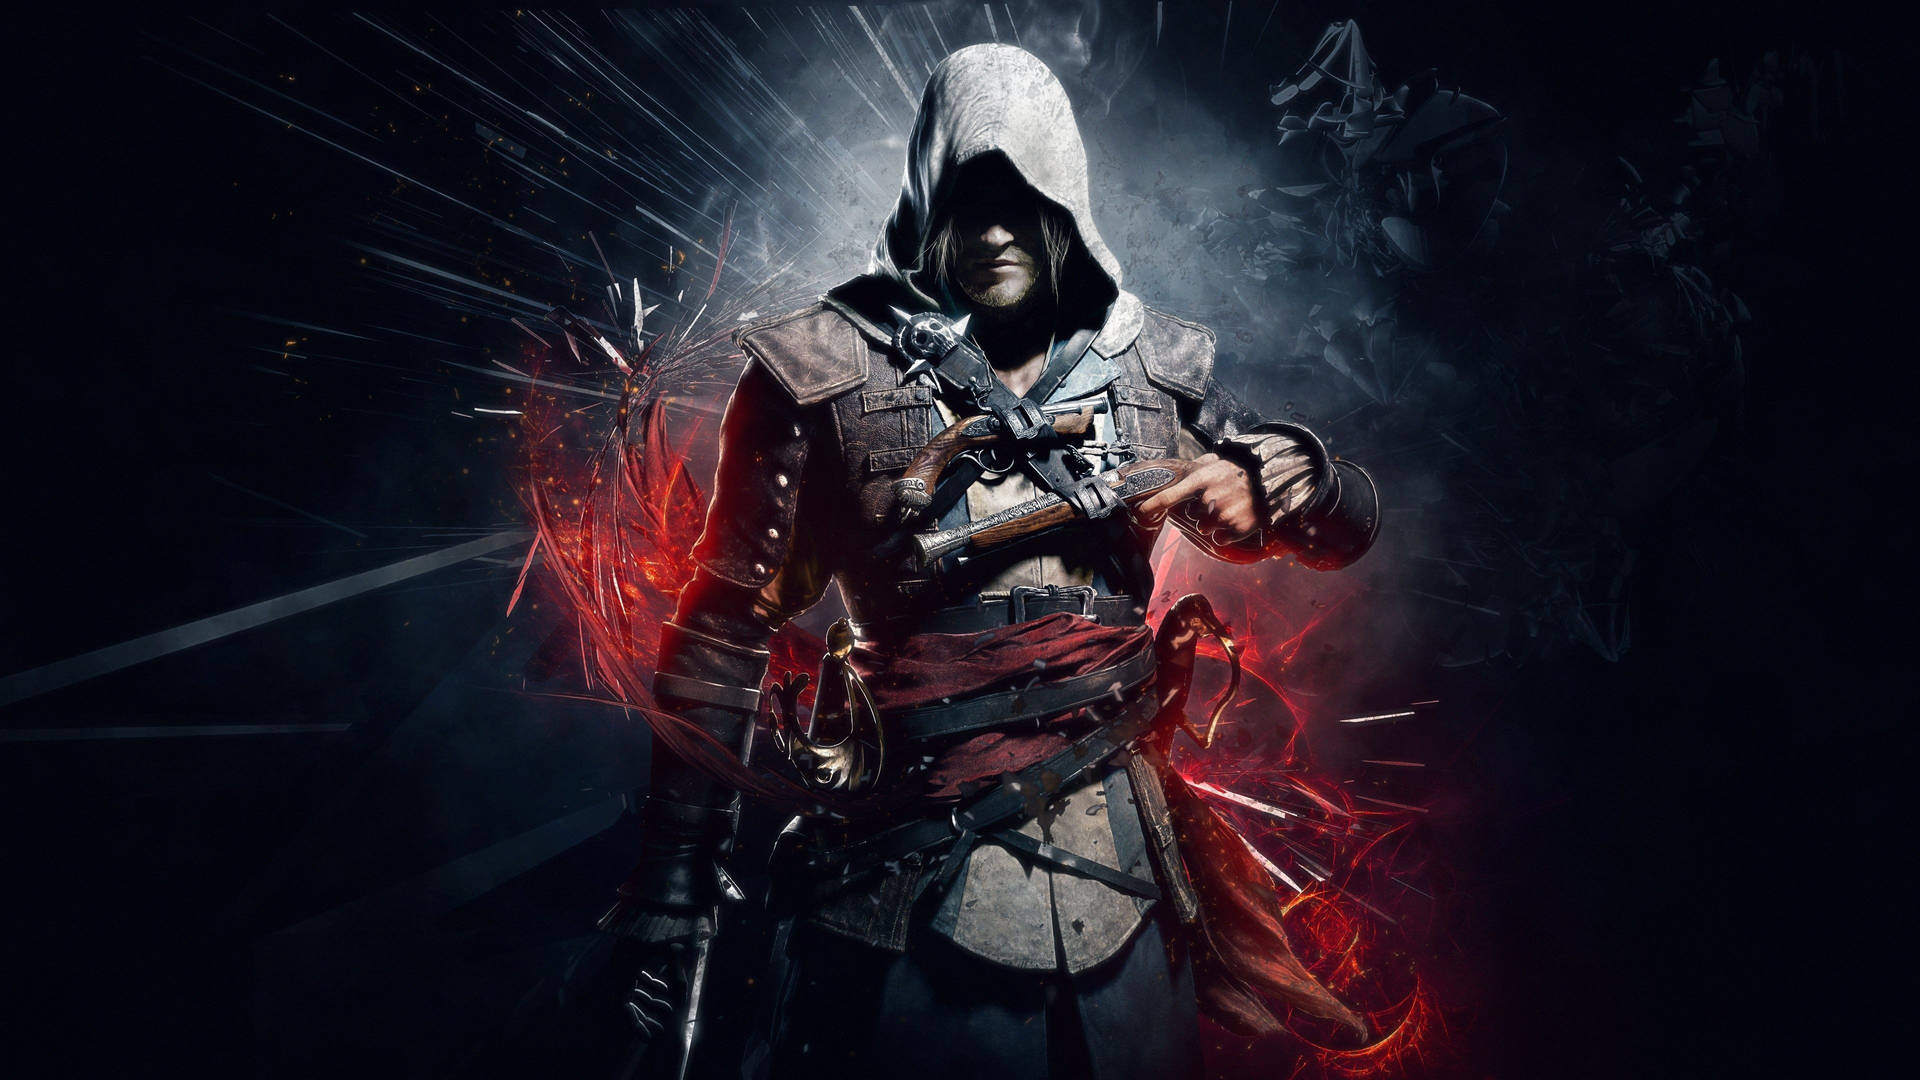 Cool Picture Of Assassins Creed Background